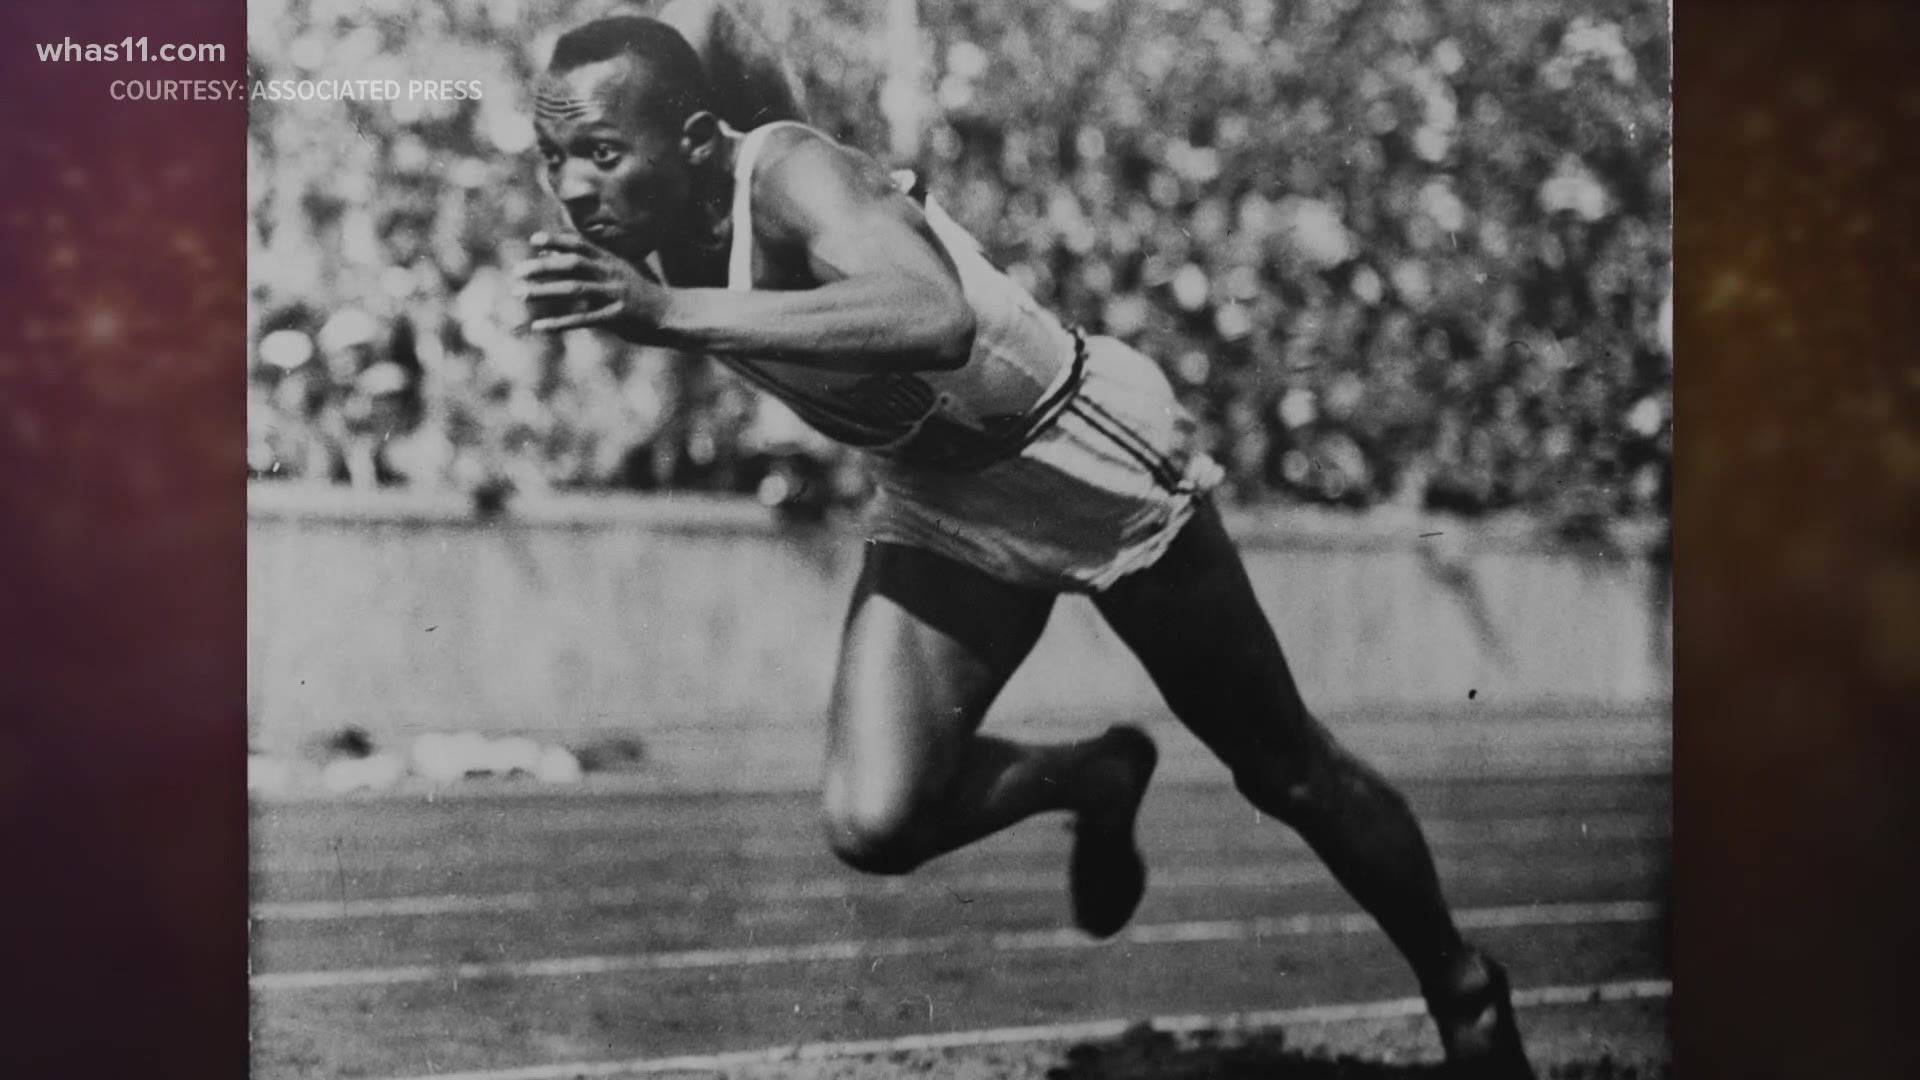 Harrison "Bones" Dillard, whose Cleveland roots helped shape him on the road to Olympic glory died in 2019 at the age of 96.